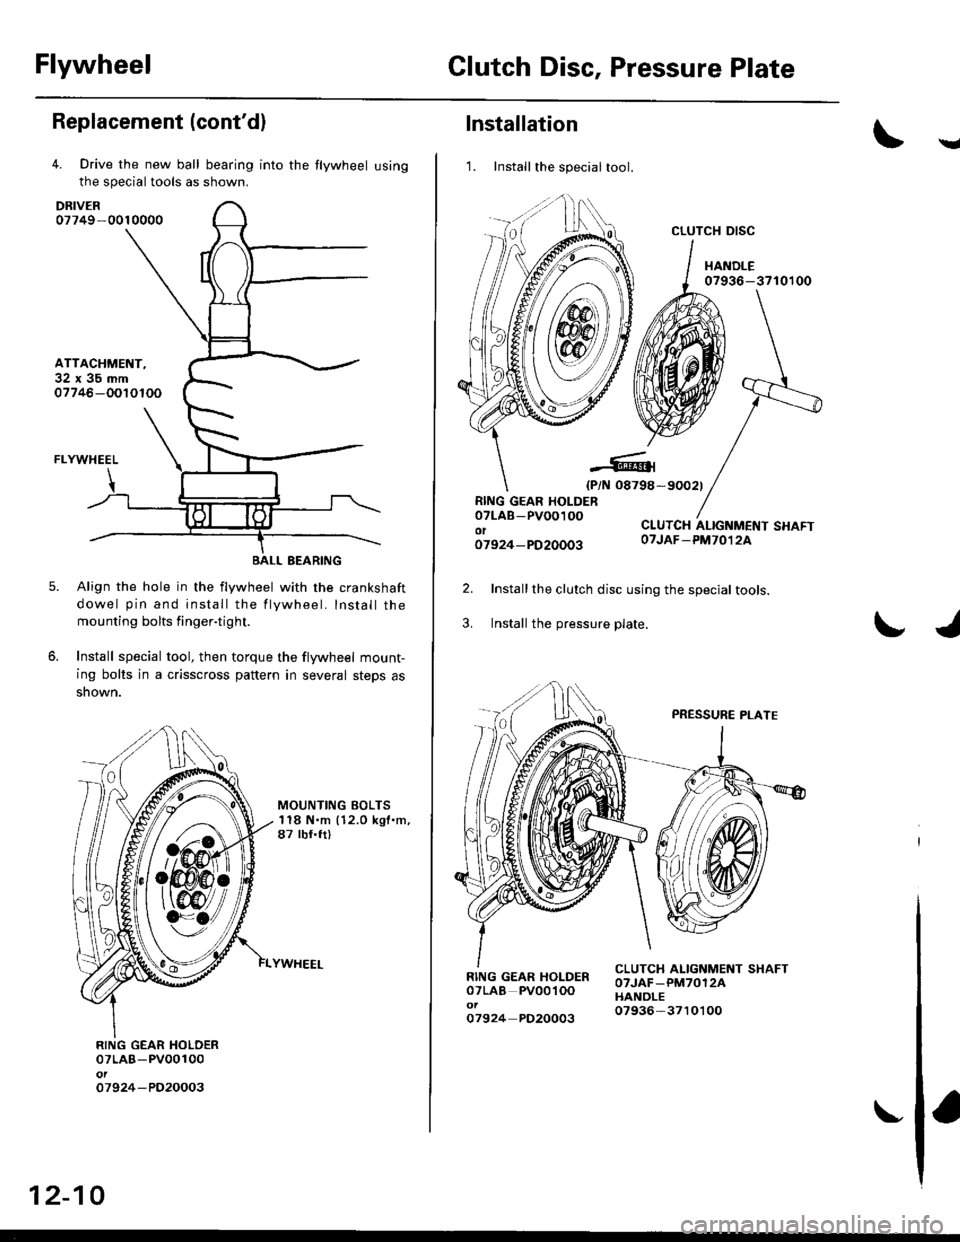 HONDA CIVIC 1998 6.G Workshop Manual FlywheelClutch Disc, Pressure Plate
Replacement (contdl
4. Drive the new ball bearing into the flywheel using
the special tools as shown.
DRIVER07749-0010000
ATTACHMENT,32x35mm07746-OOIOTOO
FLYWHEEL
